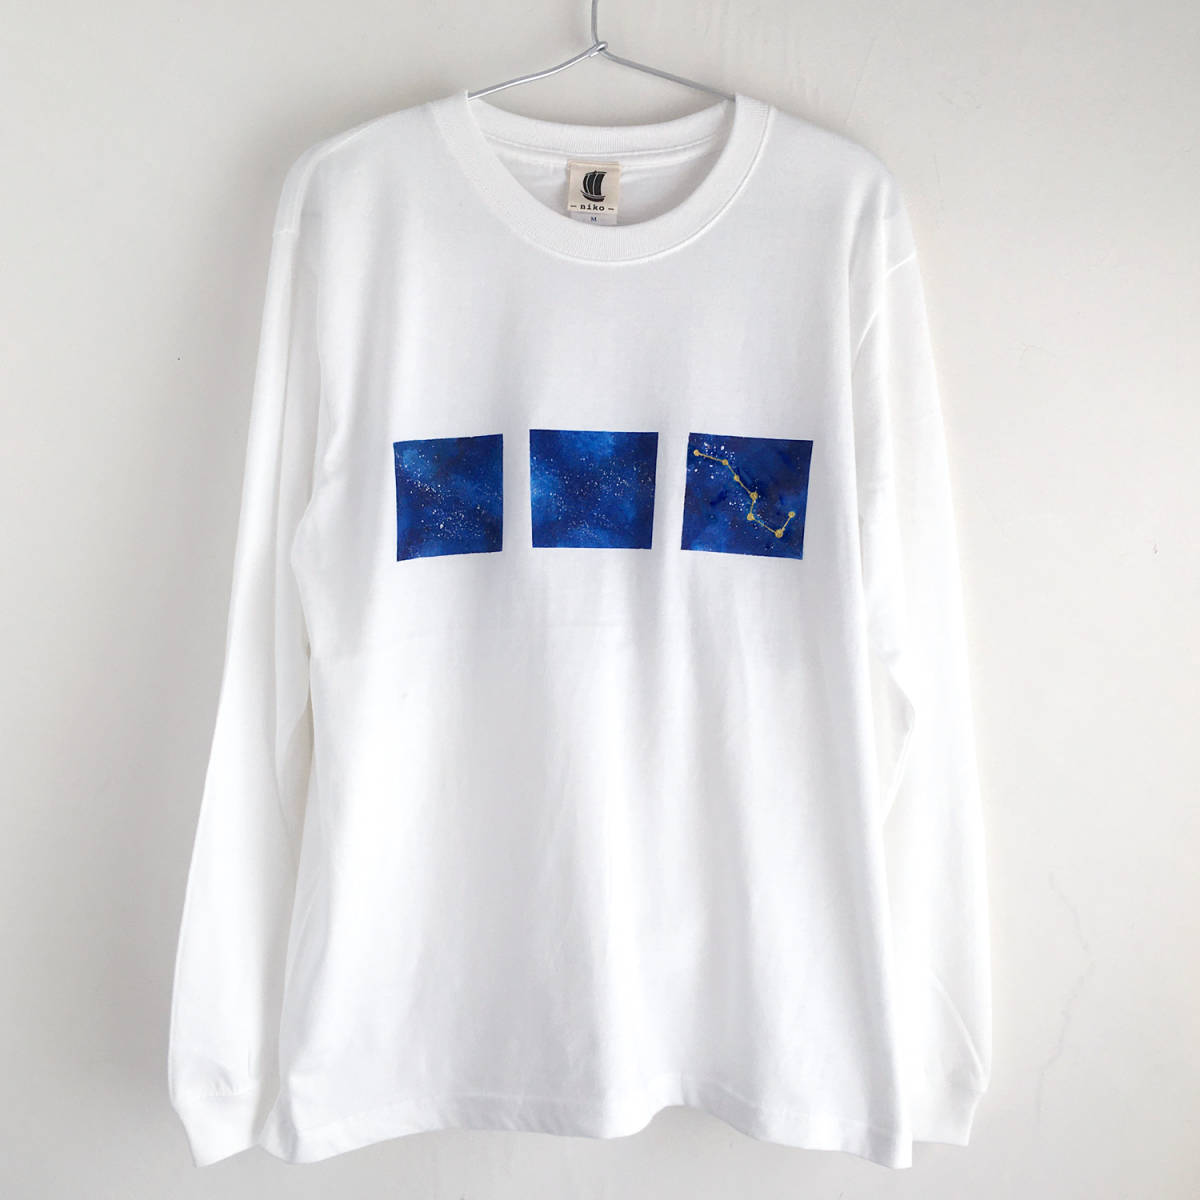 Big Dipper Pattern T-shirt White XXL Size Hand-painted Long Sleeve T-shirt with Ribbed Sleeves Long T-shirt Seven Stars Space, T-shirt, long sleeve, XL size and above